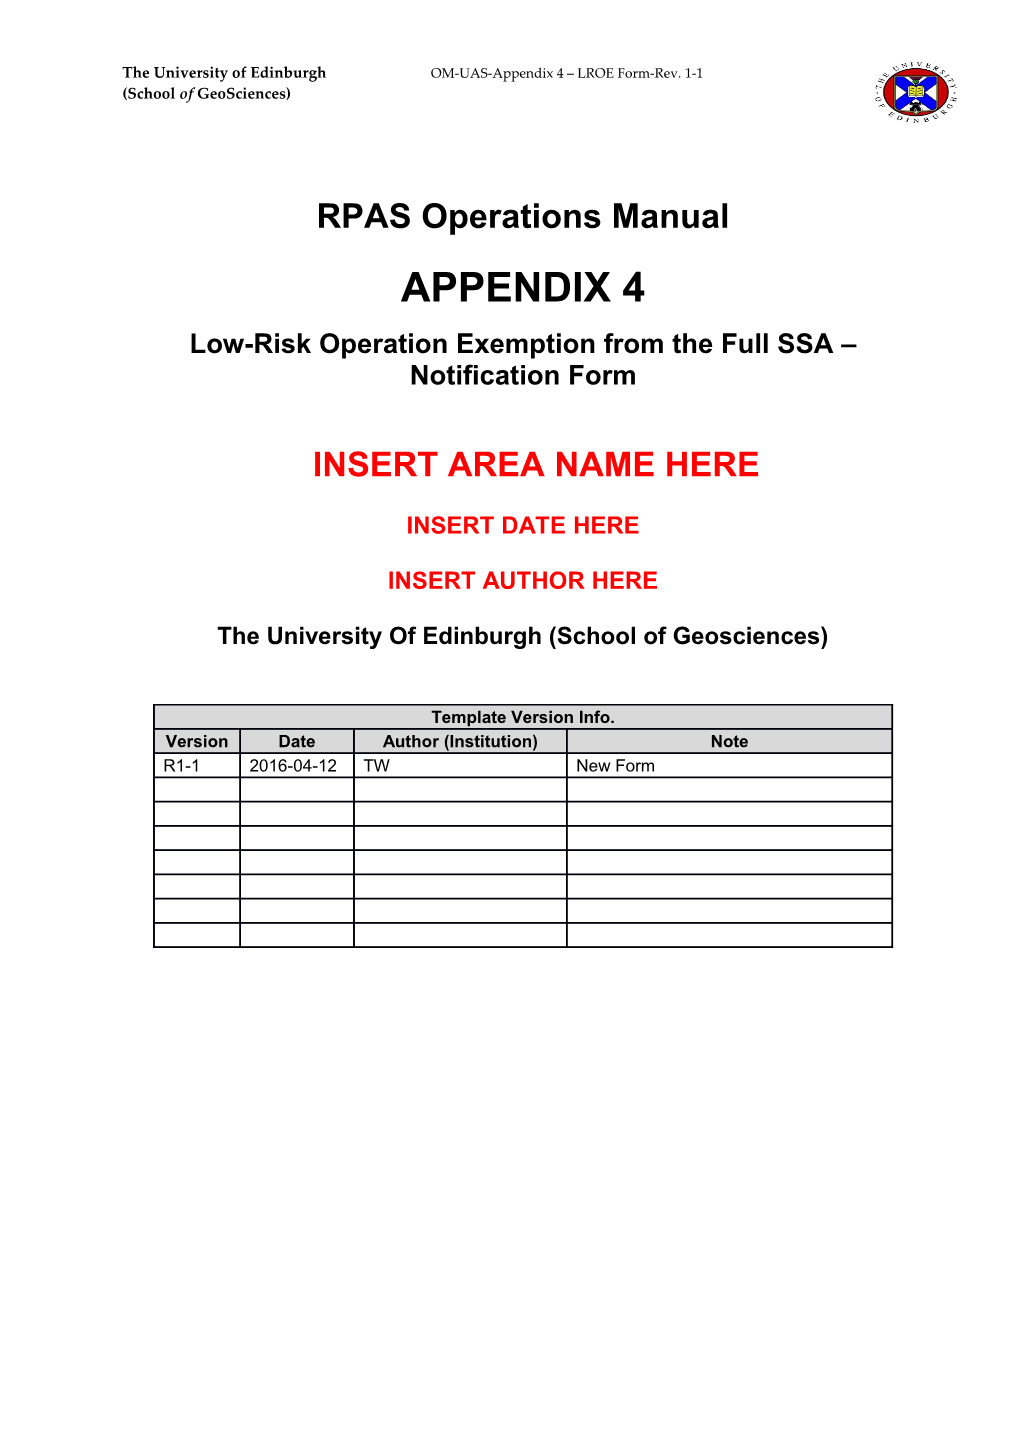 Low-Risk Operation Exemption from the Full SSA Notification Form